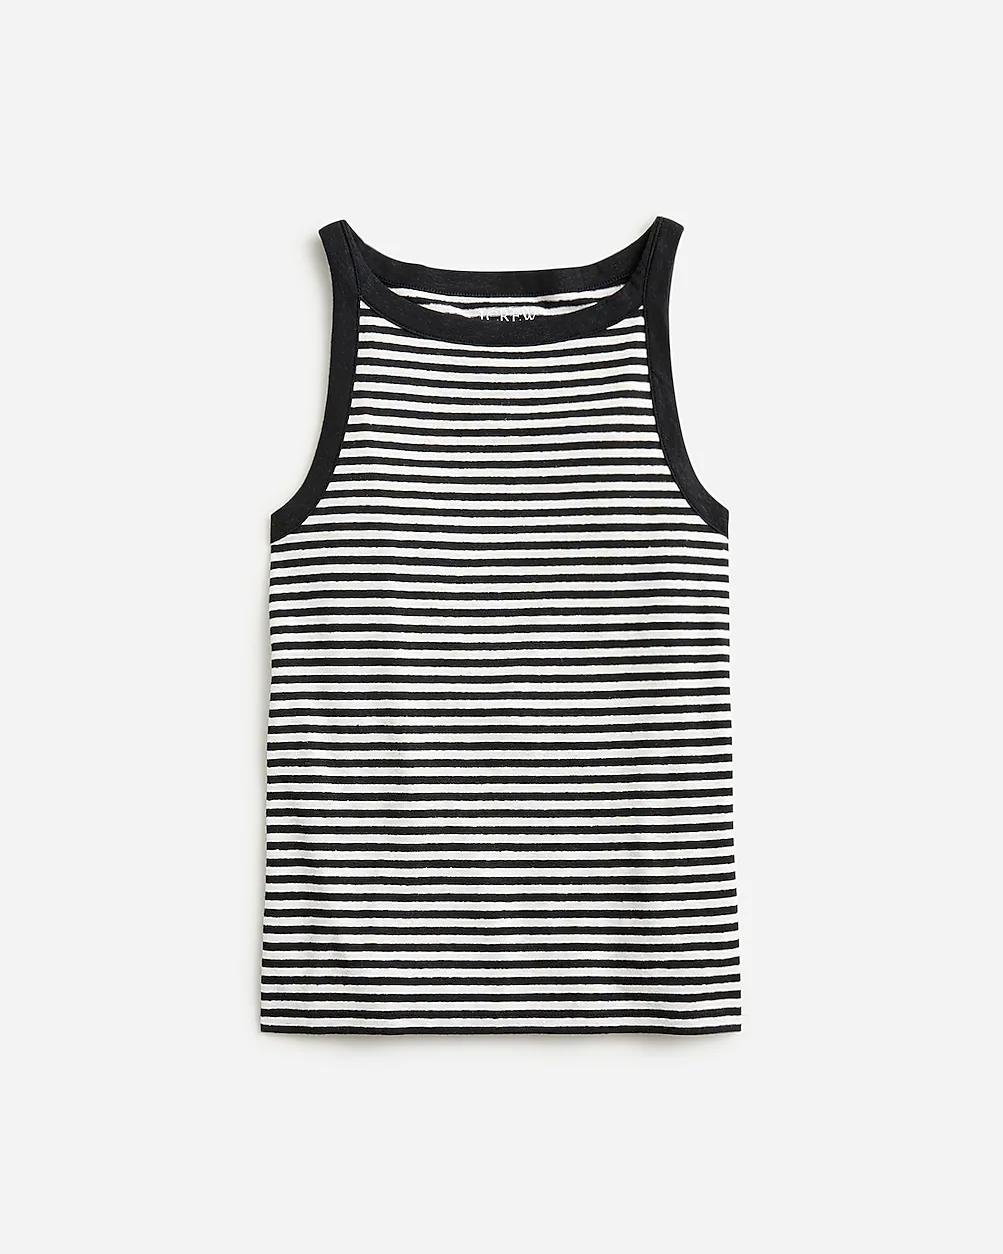 High-neck tank top in striped stretch linen blend by J.CREW